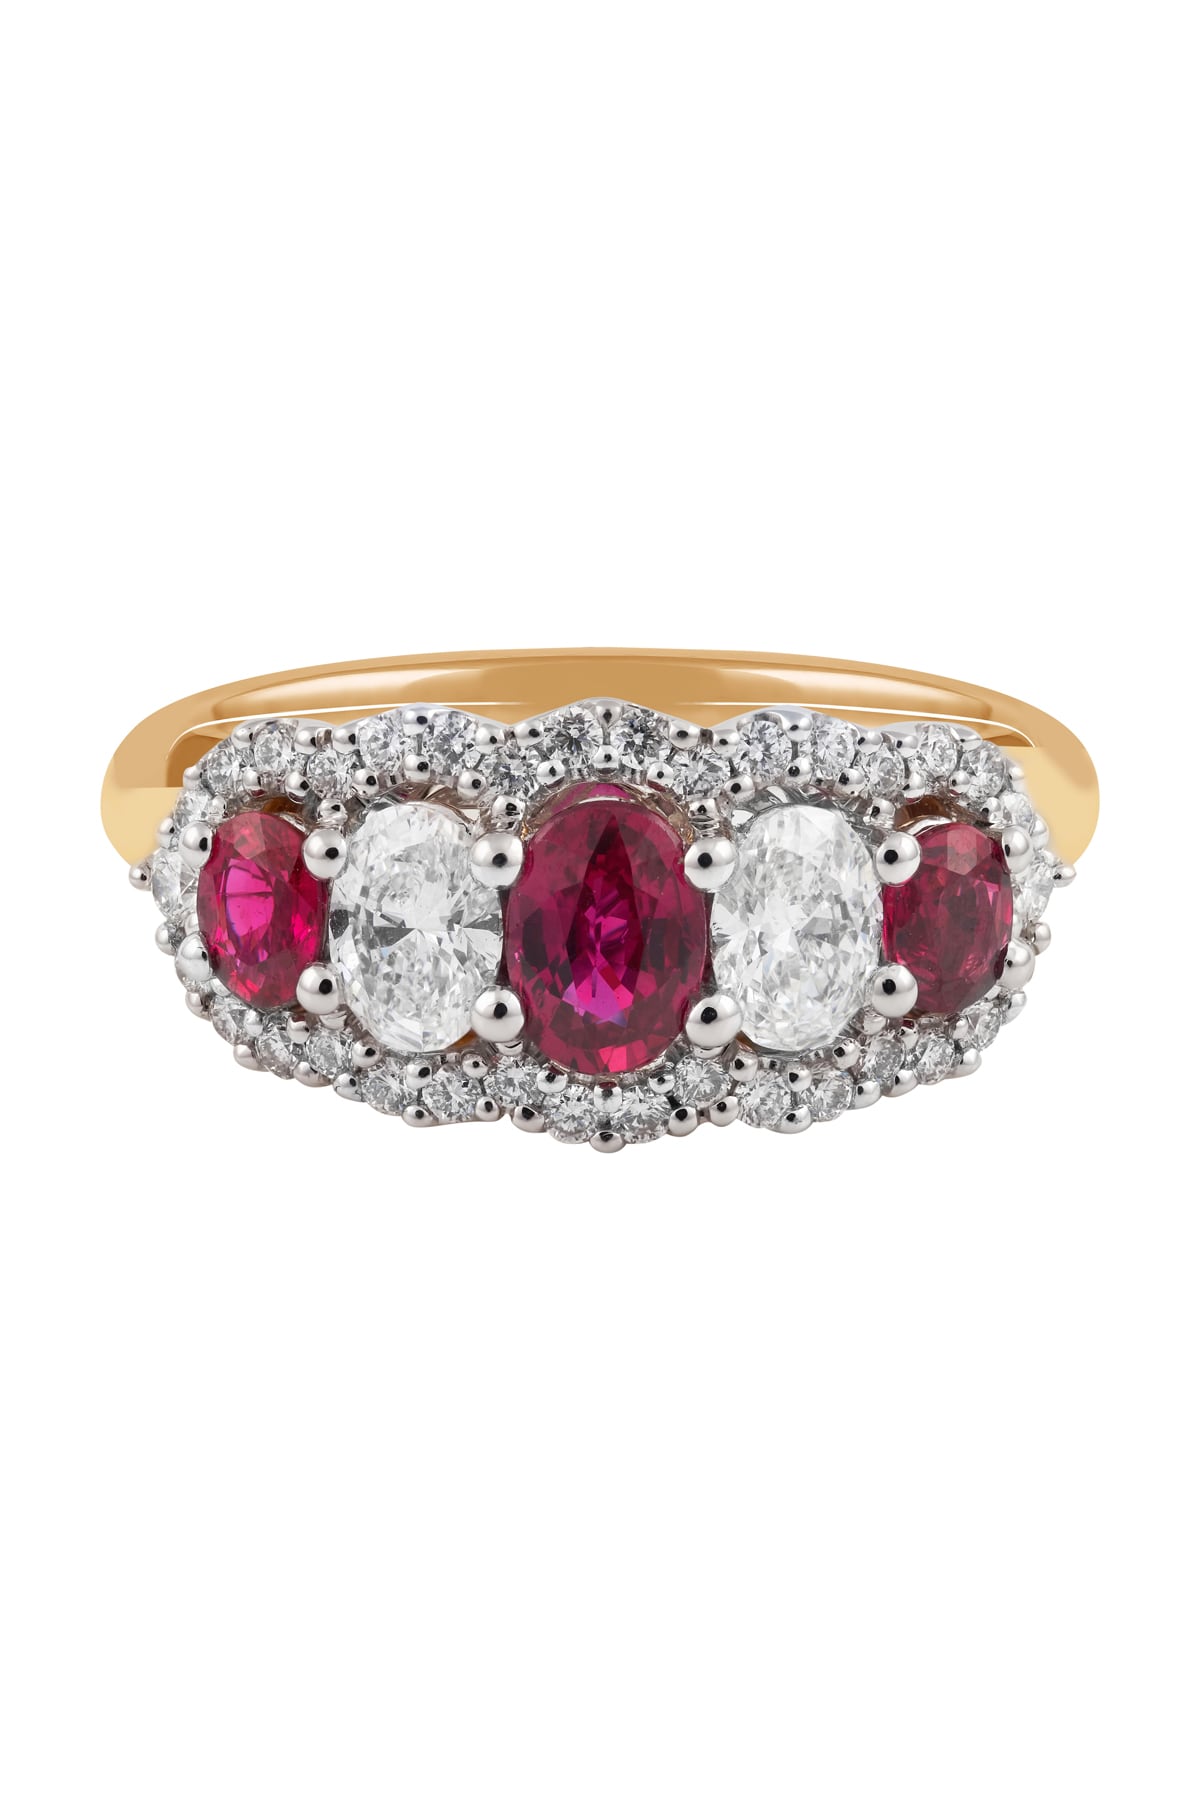 Natural Ruby and Diamond Trilogy Ring set in 18ct Yellow and White Gold available at LeGassick Diamonds and Jewellery Gold Coast, Australia.